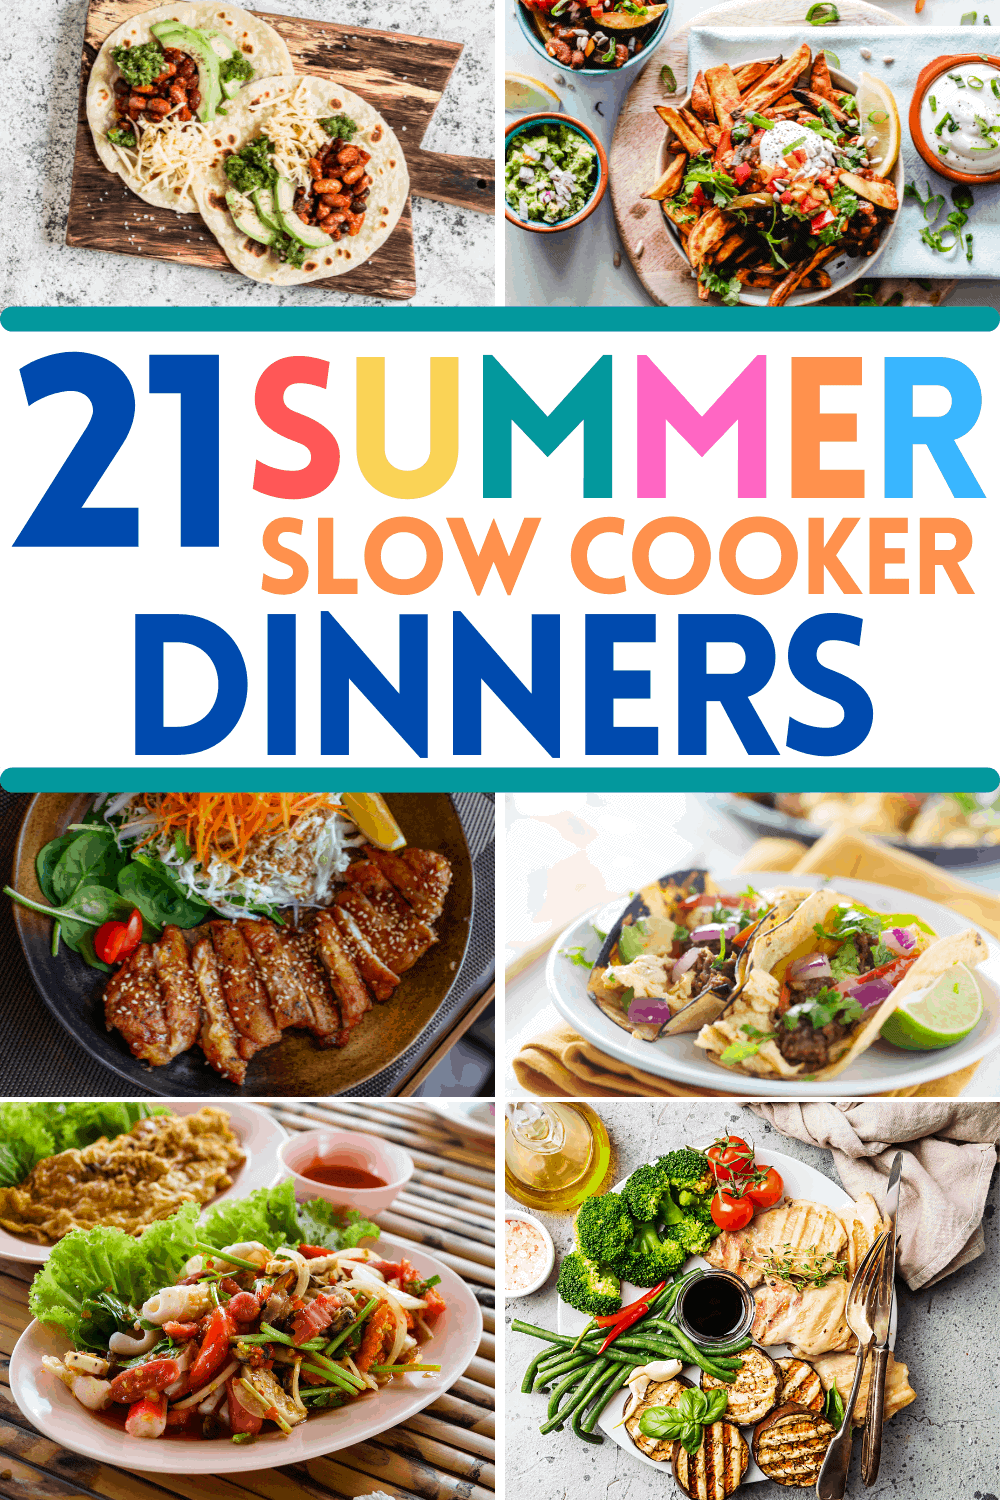 Quick summer slow cooker recipes! These easy summer crockpot dinners are kid-friendly, perfect for entertaining, and will keep your kitchen cool on hot days.